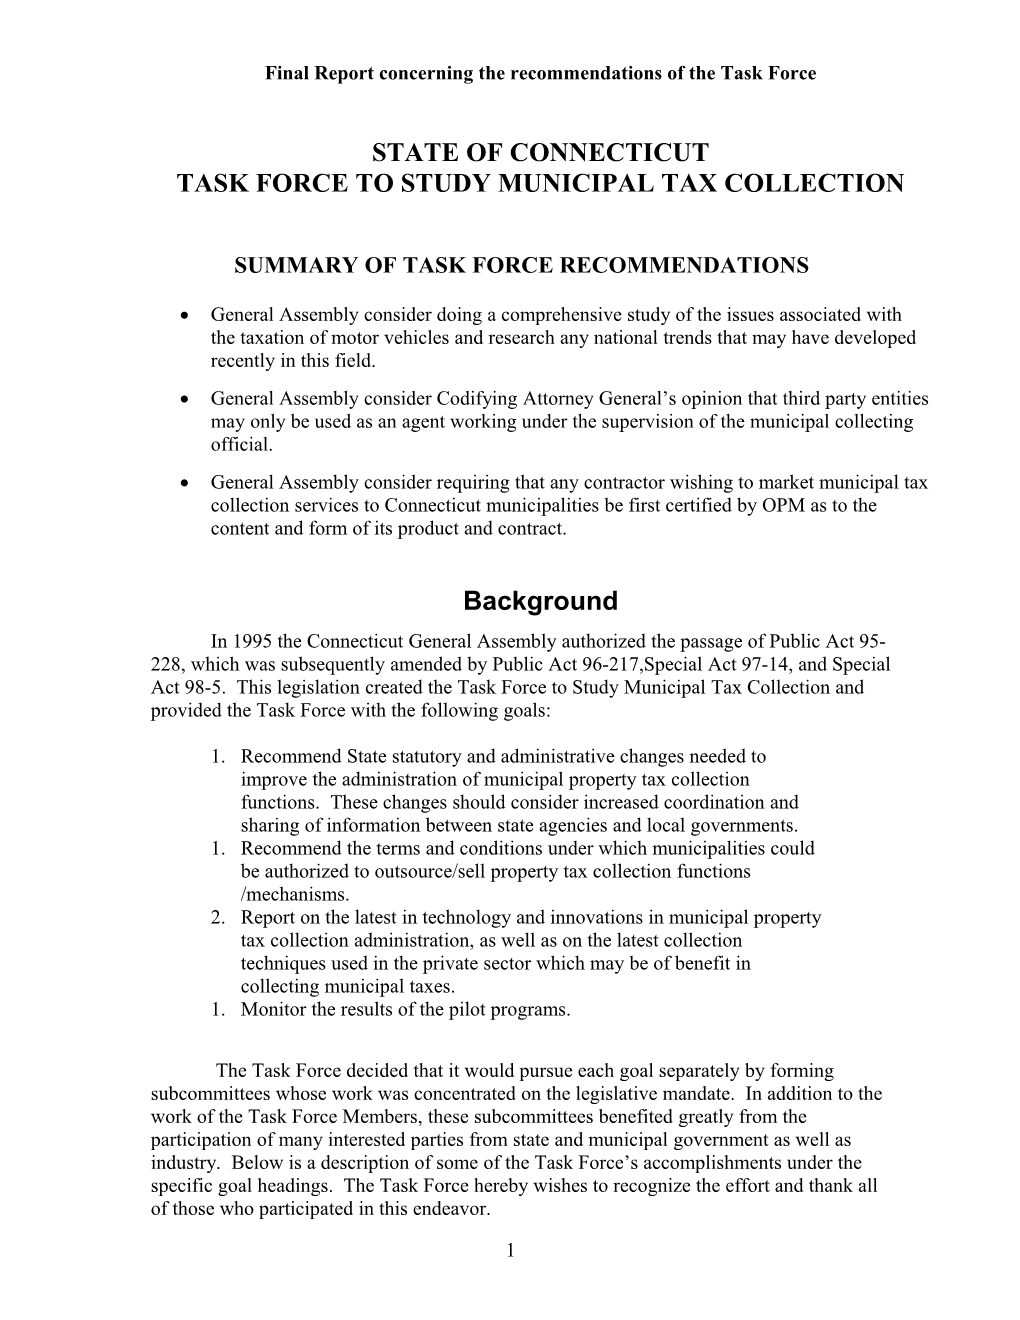 Task Force to Study Municipal Tax Collections